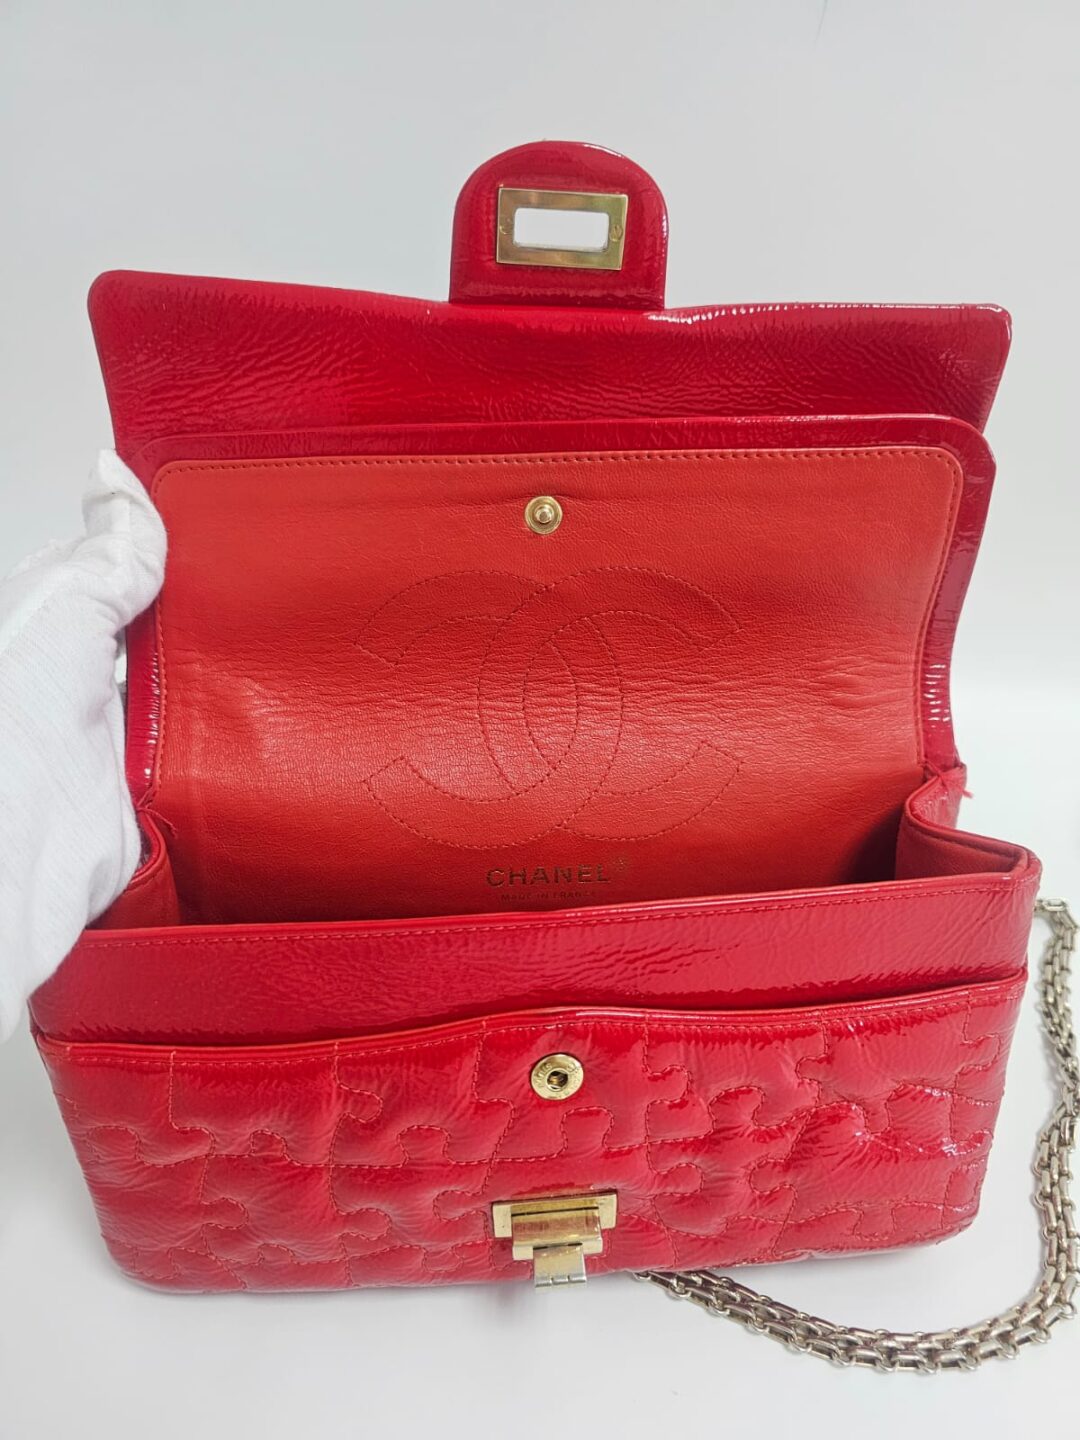 Chanel Patent Leather Puzzle Tote - Red Handle Bags, Handbags - CHA837826